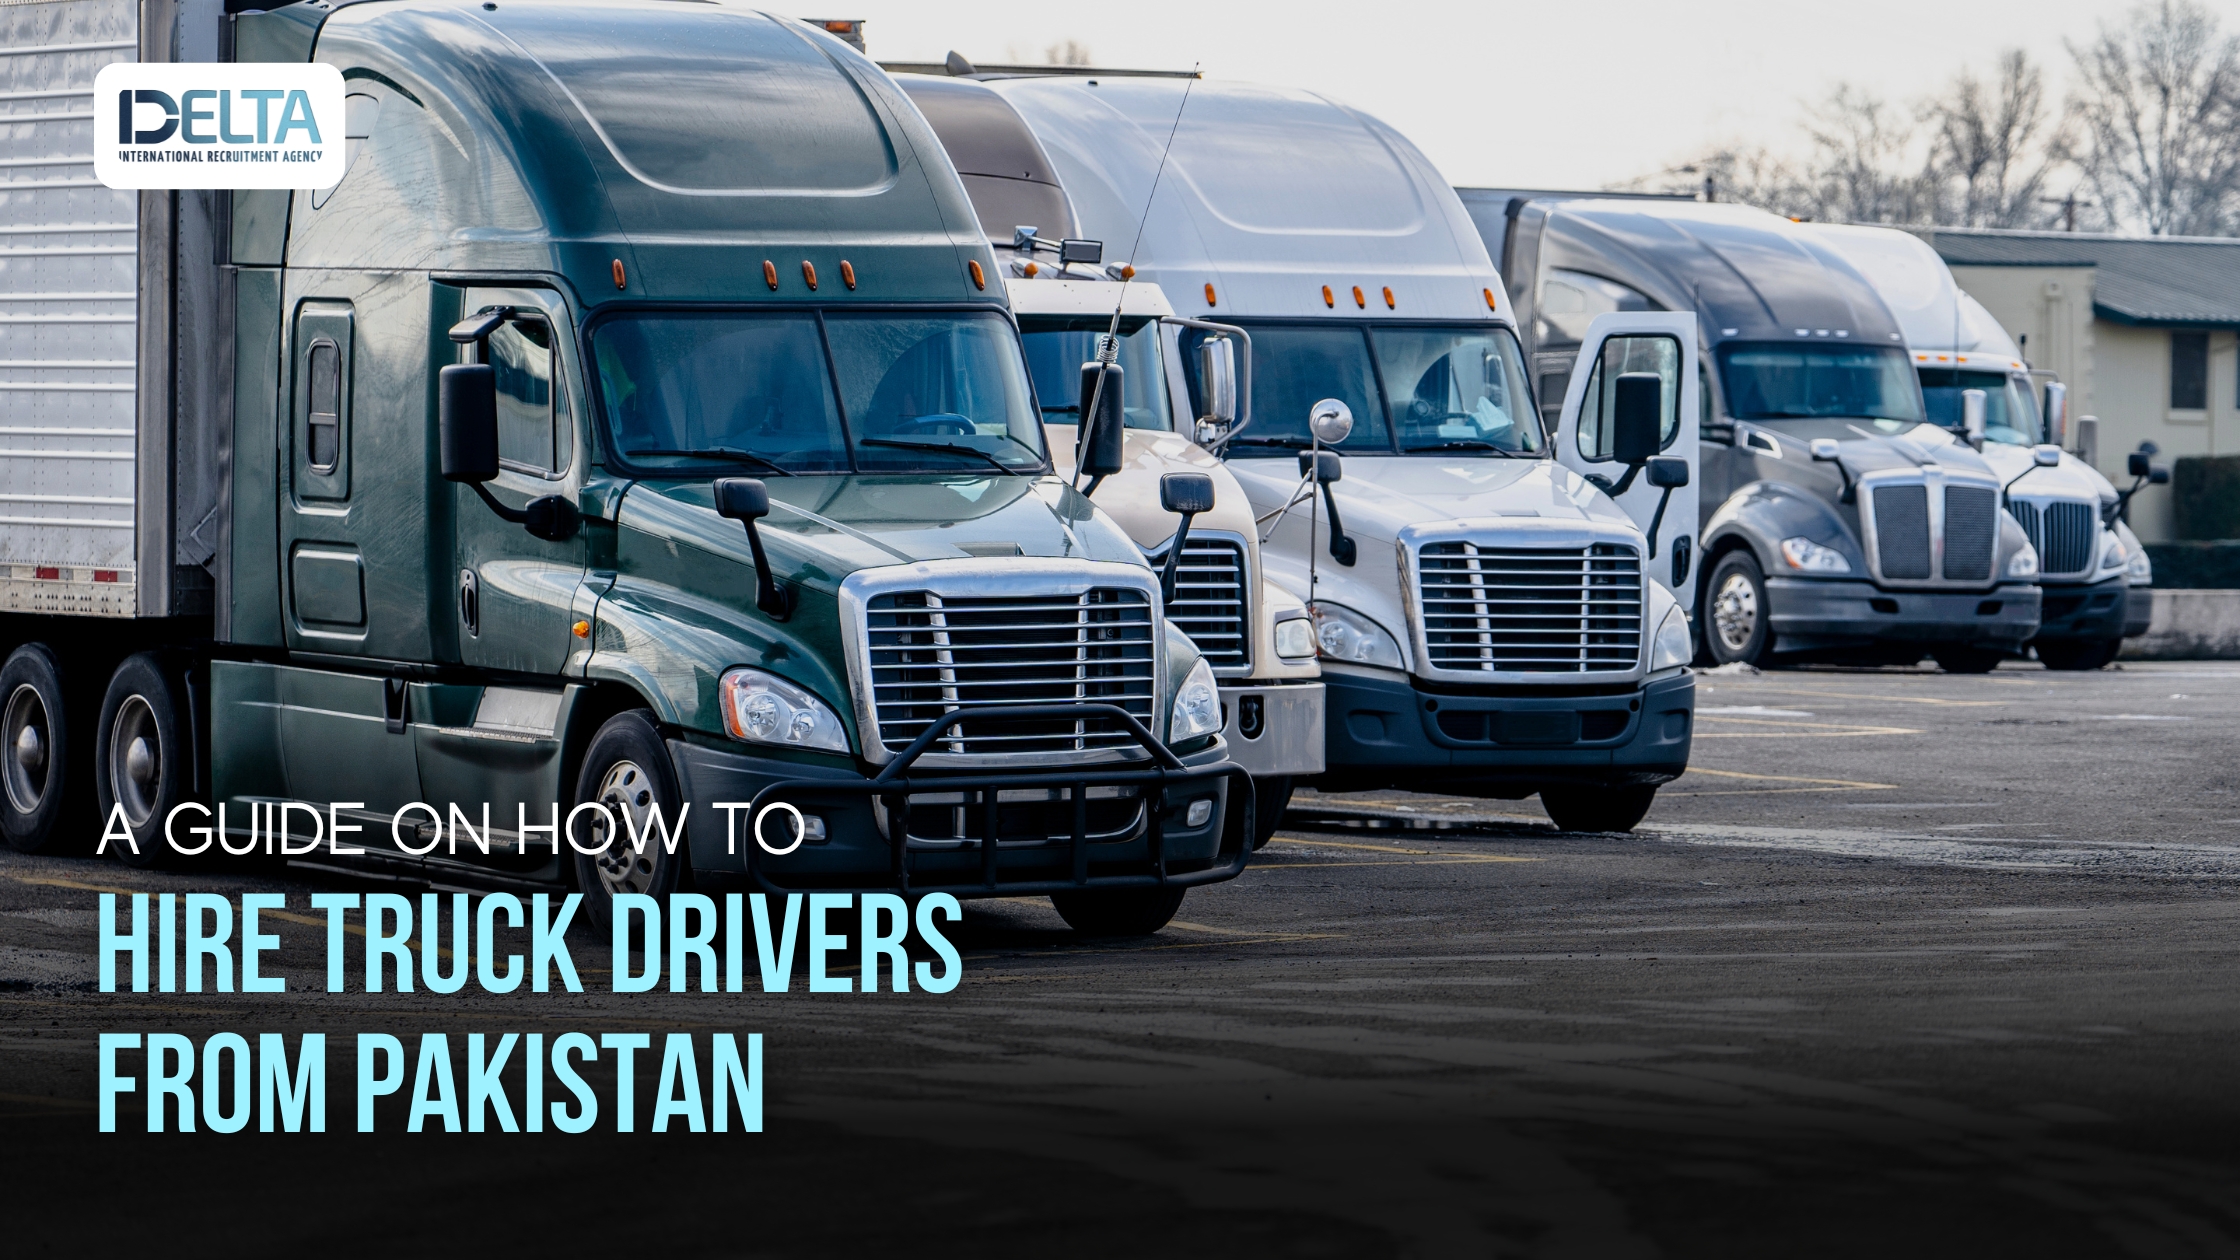 A Guide on How to Hire Truck Drivers from Pakistan